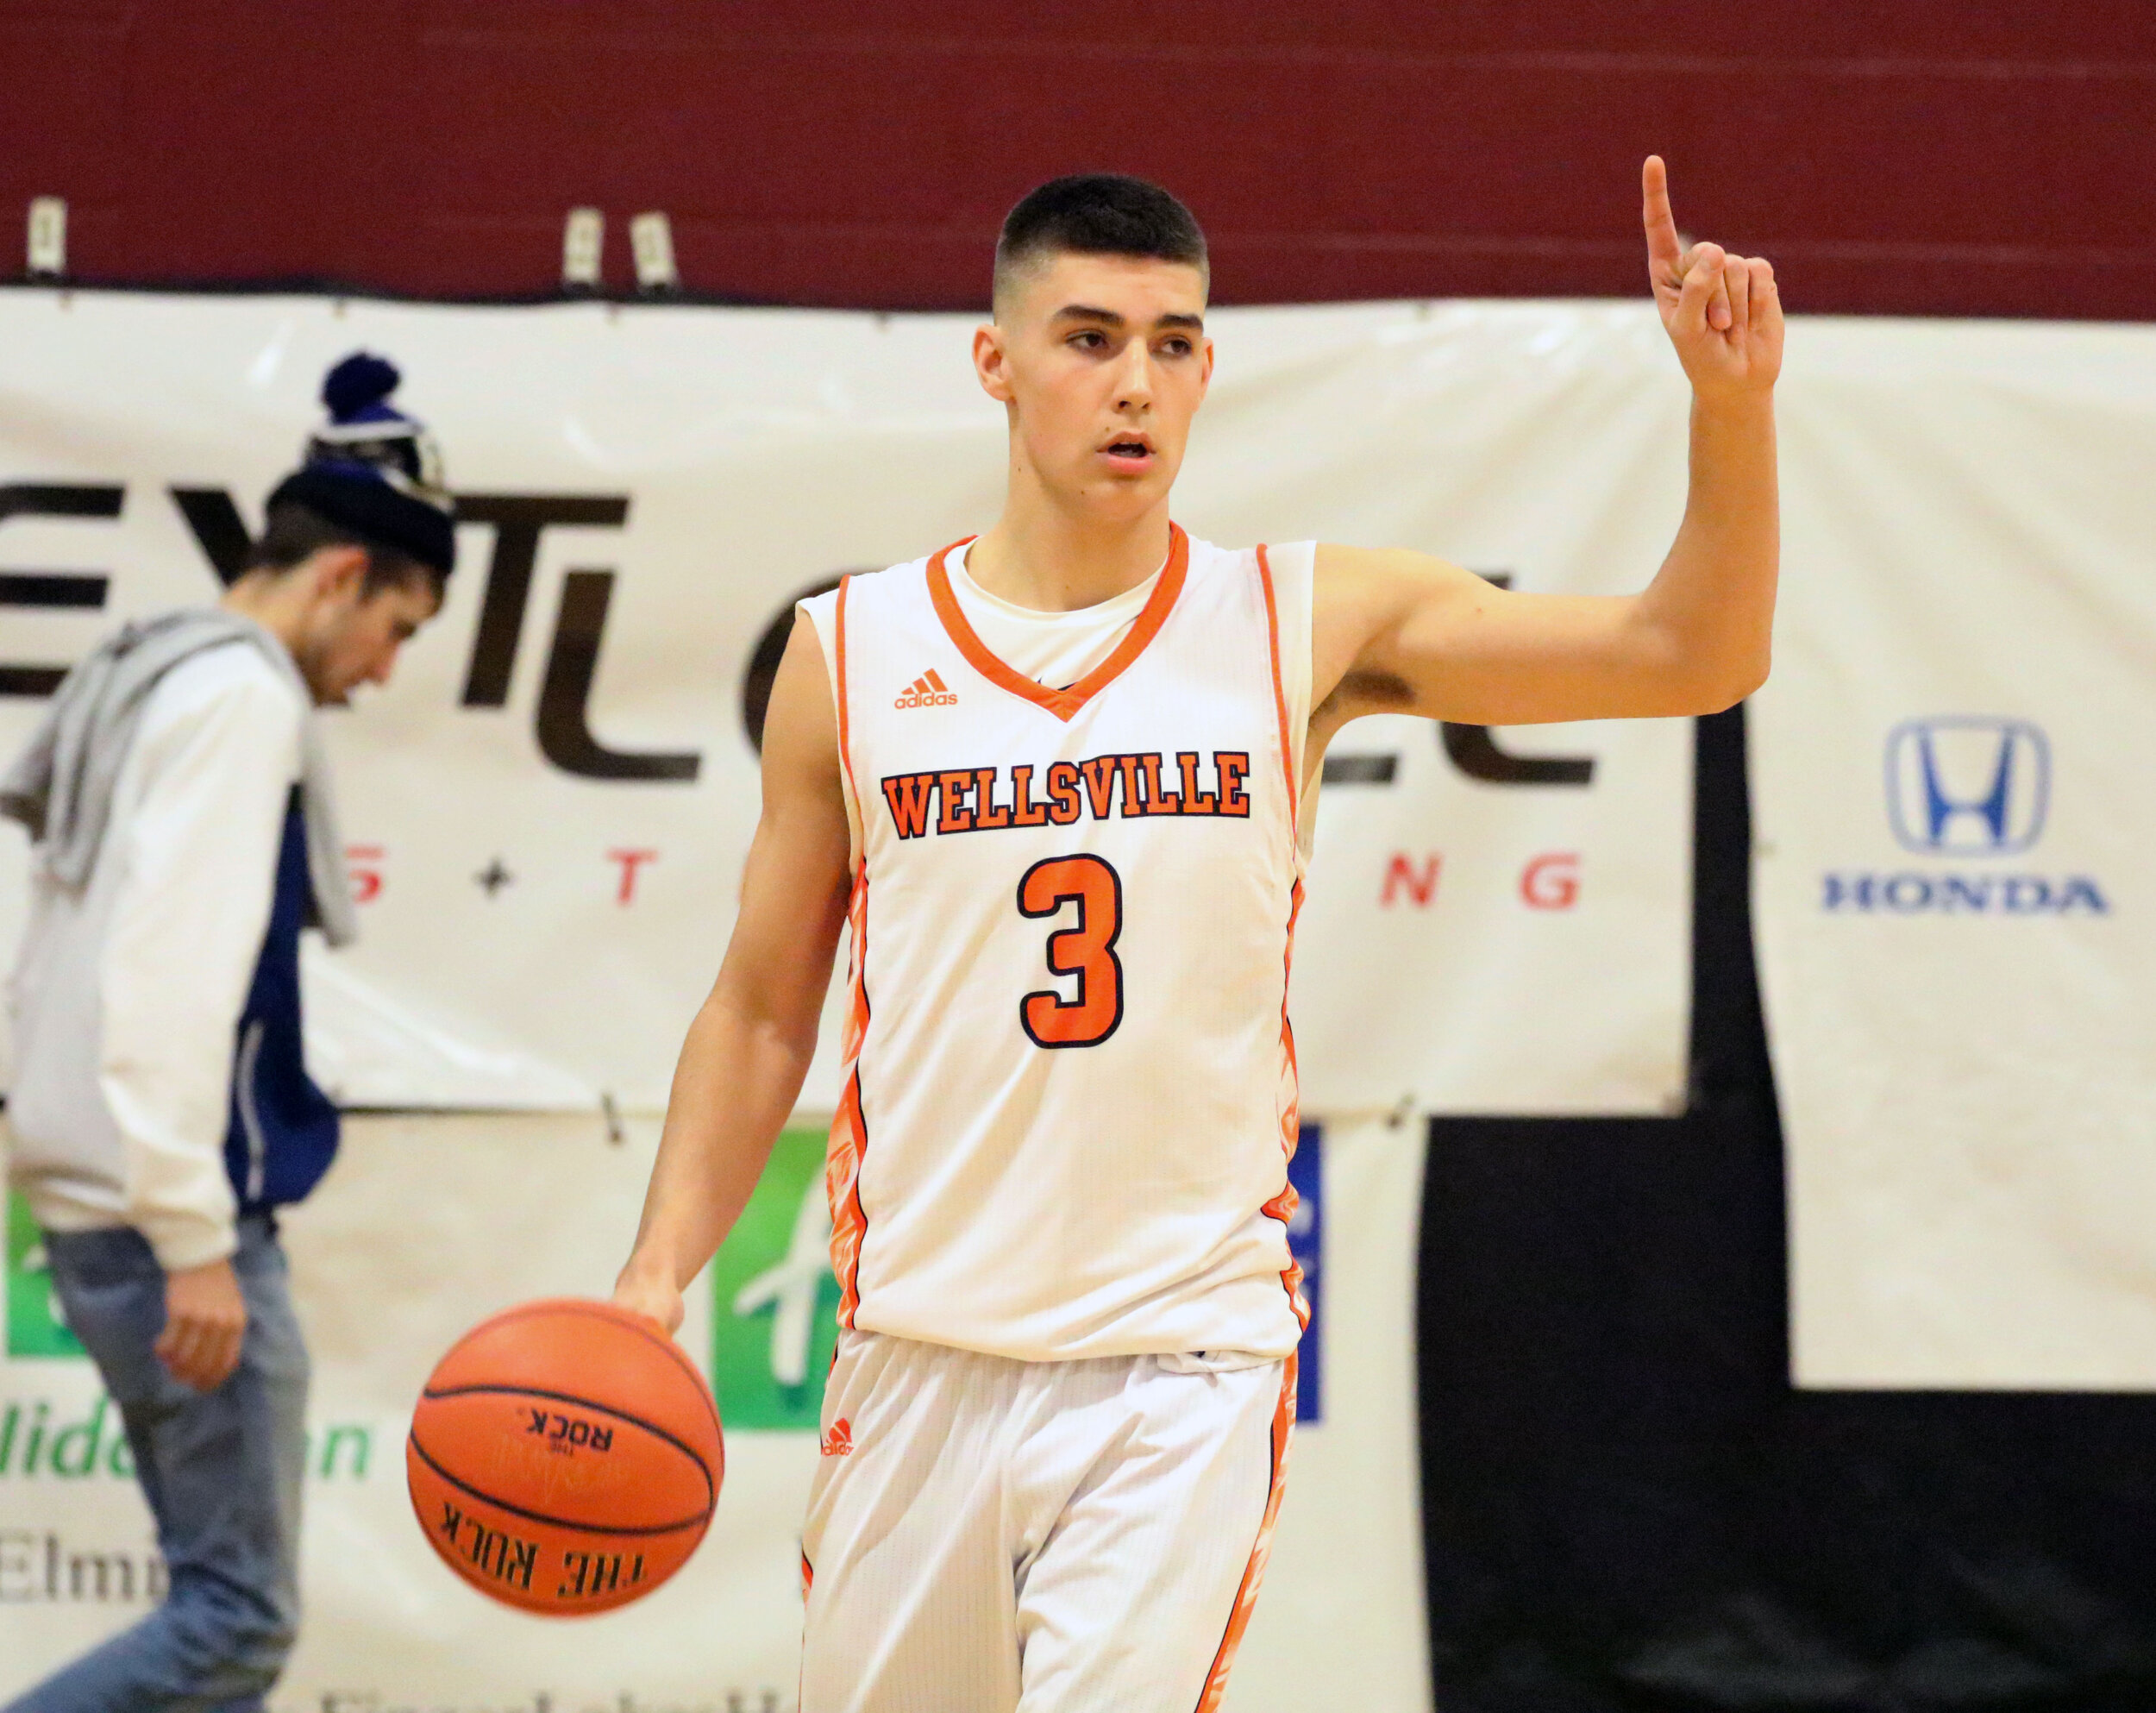  Wellsville senior Max Jusianiec (3) calls out a play as he makes his way down the court during their contest against North Penn-Mansfield earlier this week in Elmira. The Lions bounced back in the Consolation round of tournament action at Watkins Gl